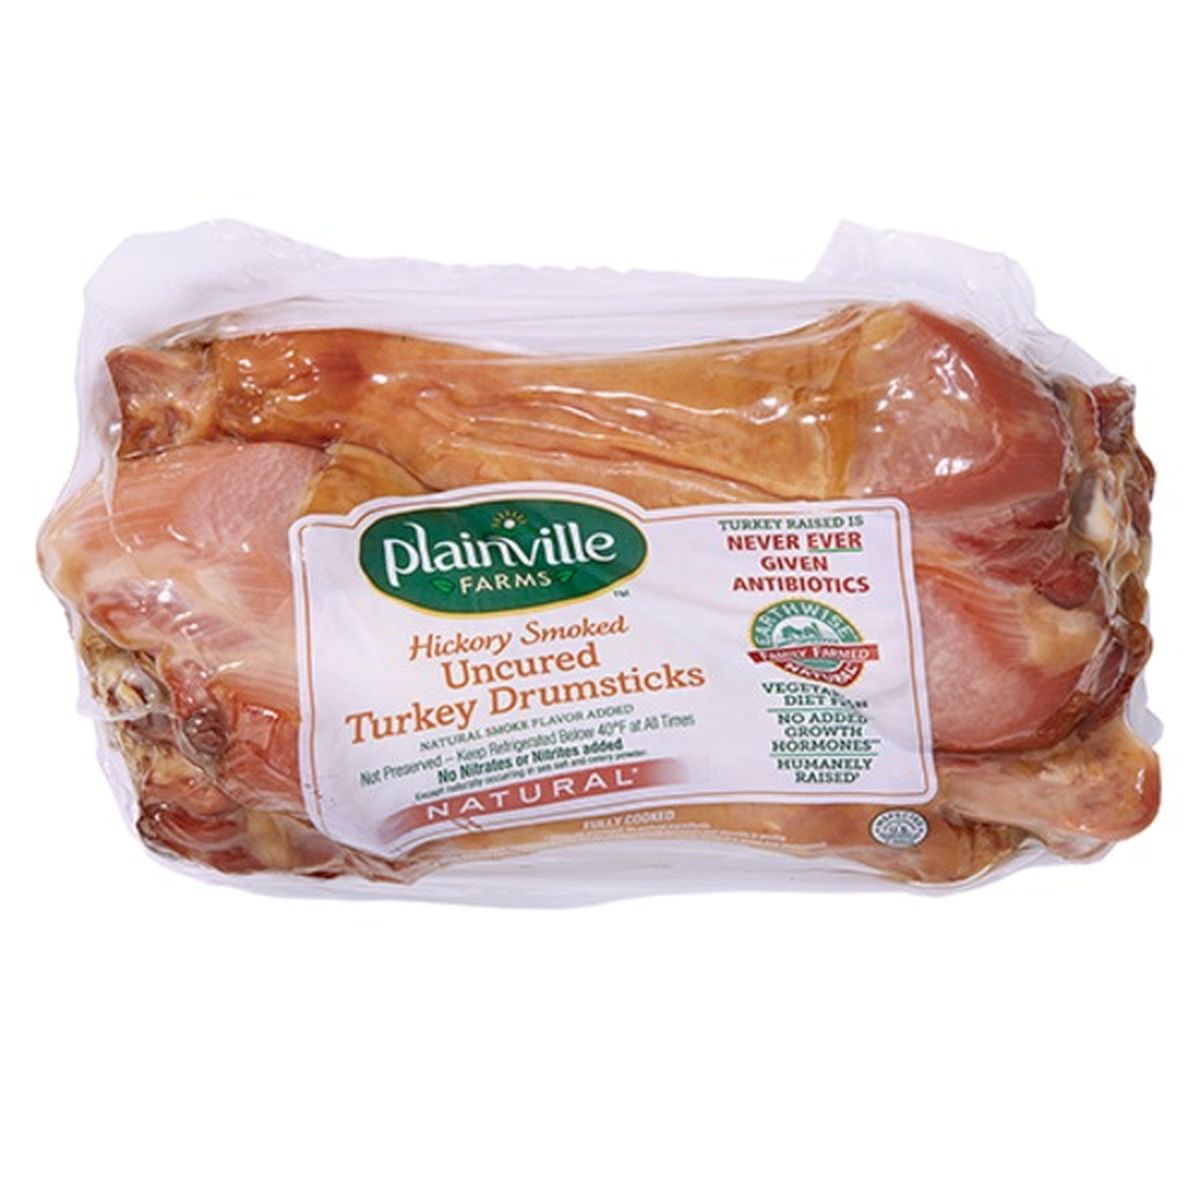 Calories in Plainville Farms Hickory Smoked Uncured Turkey Drumsticks